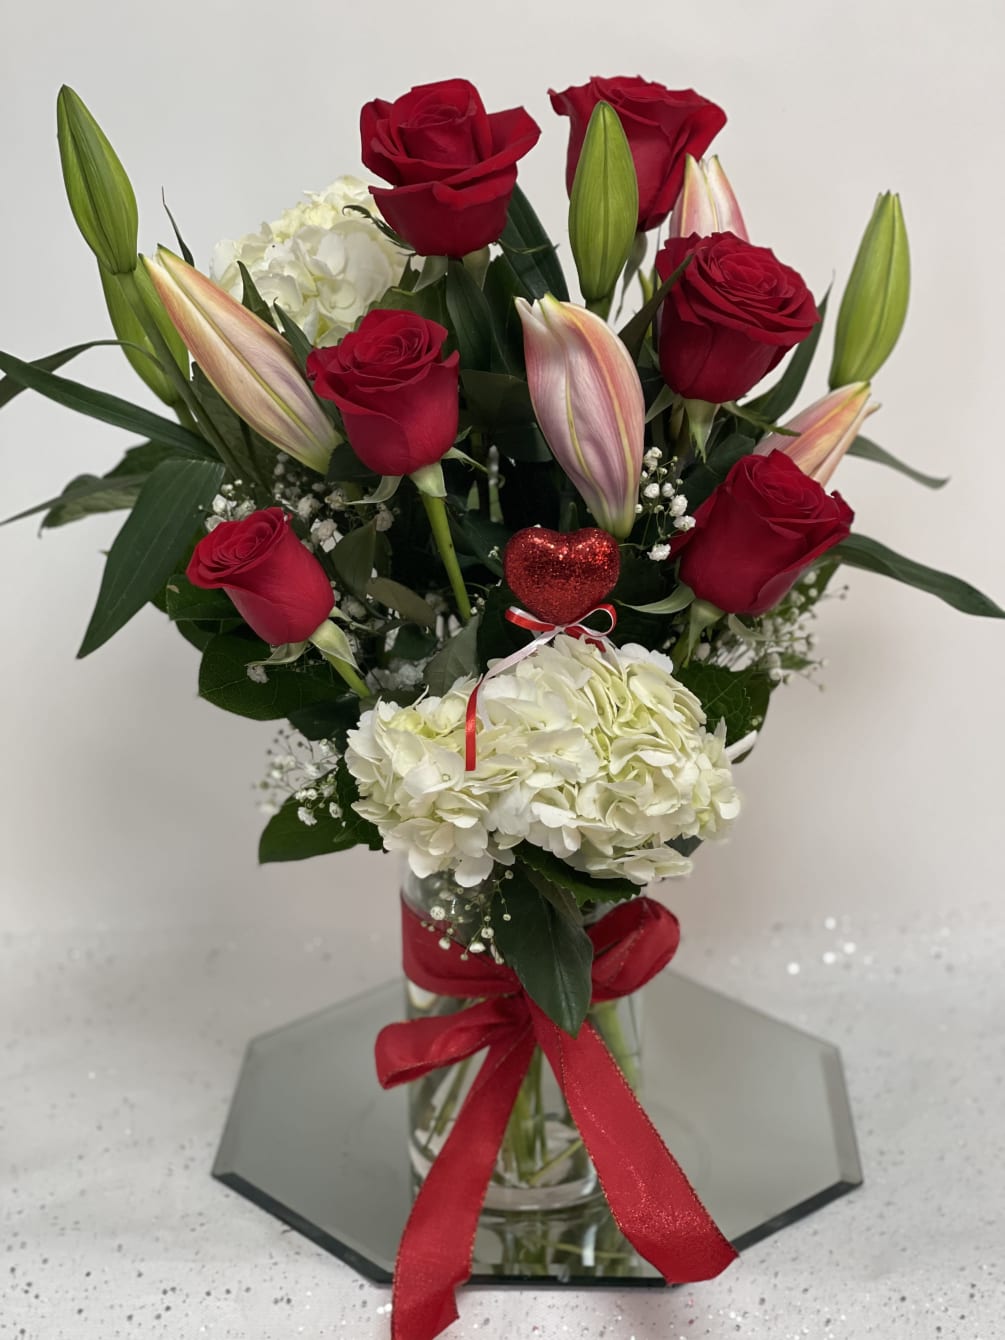 Roses, Lilies, and a Hydrangea in a glass vase with a red